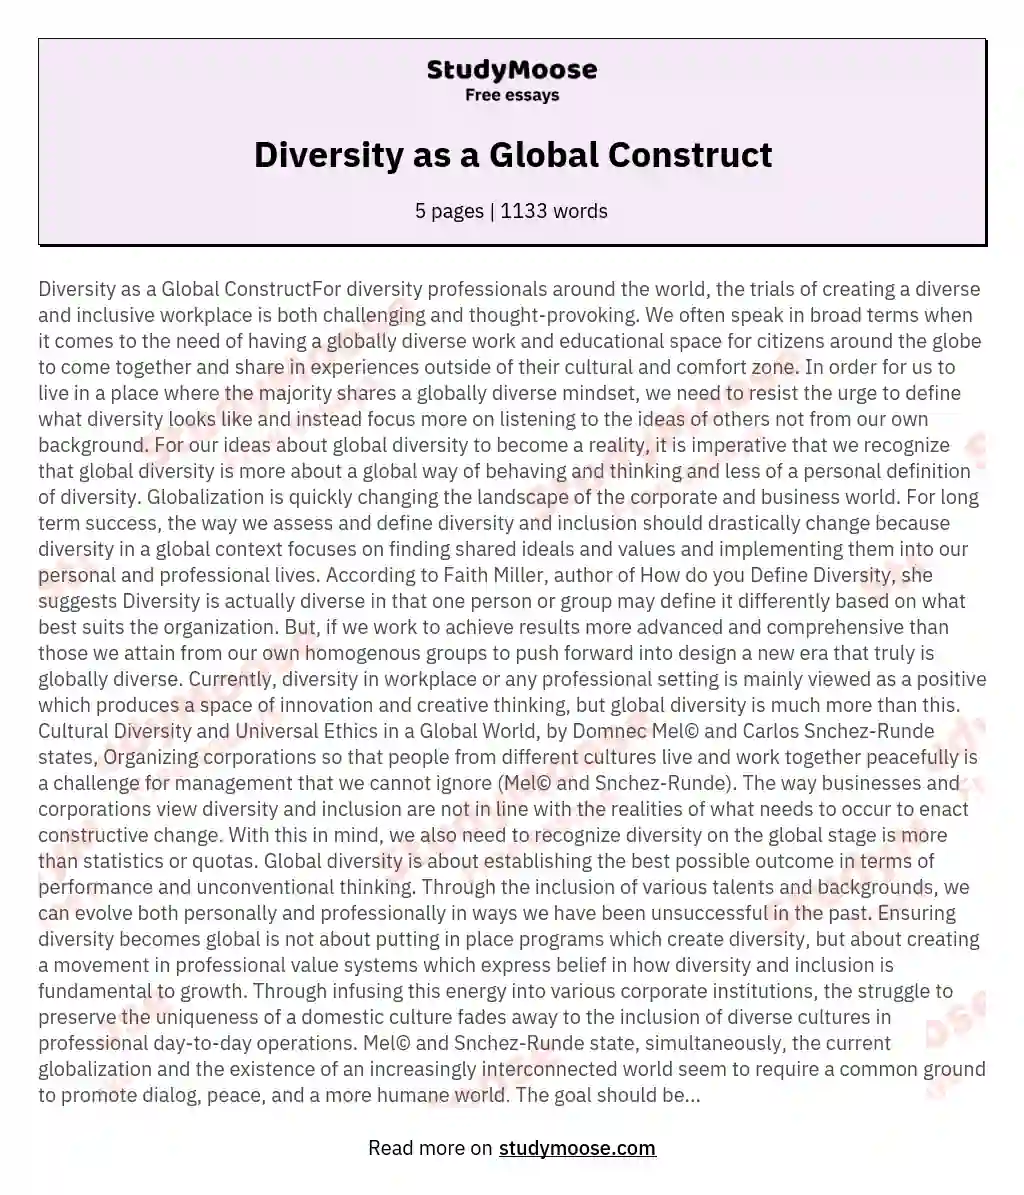 Diversity as a Global Construct essay